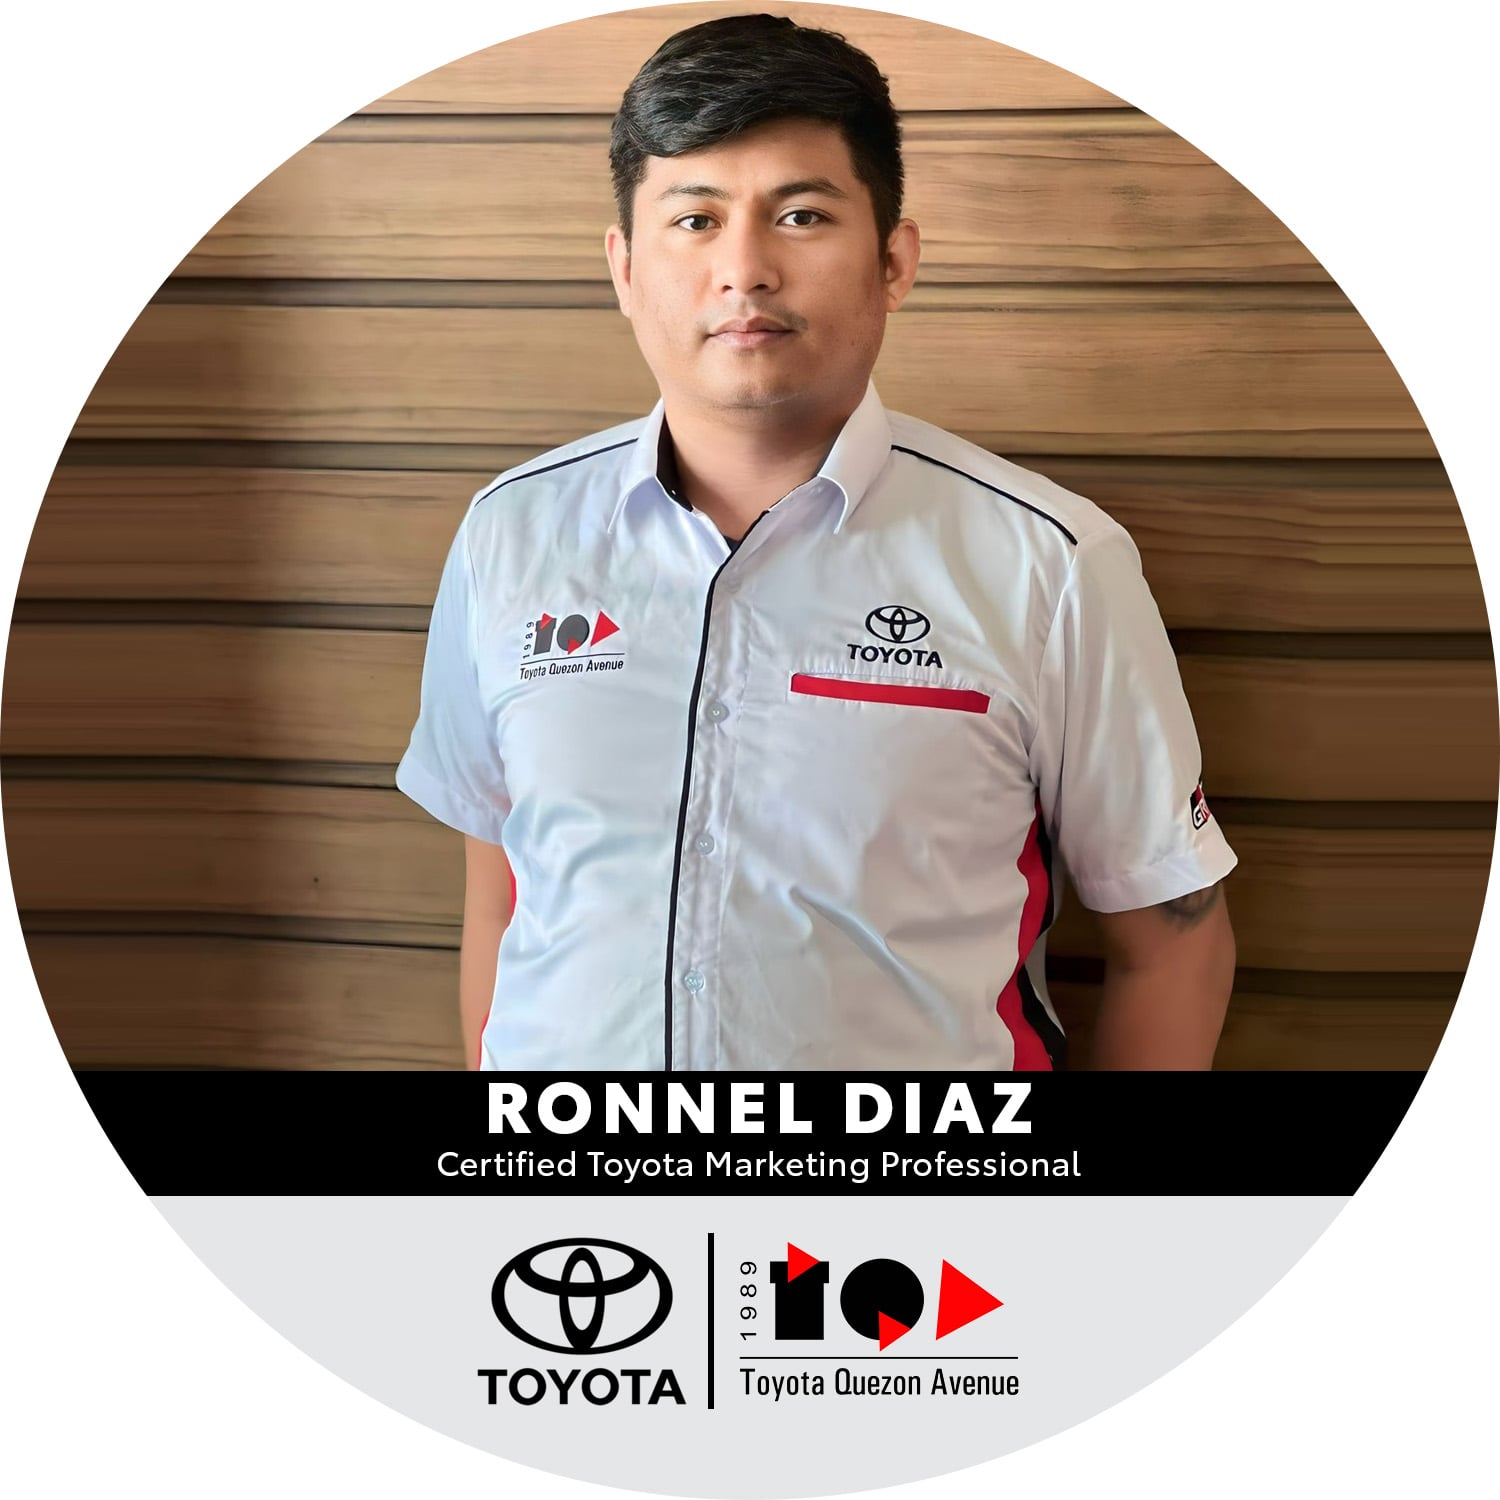 Certified Toyota Marketing Professionals - Ronnel Diaz